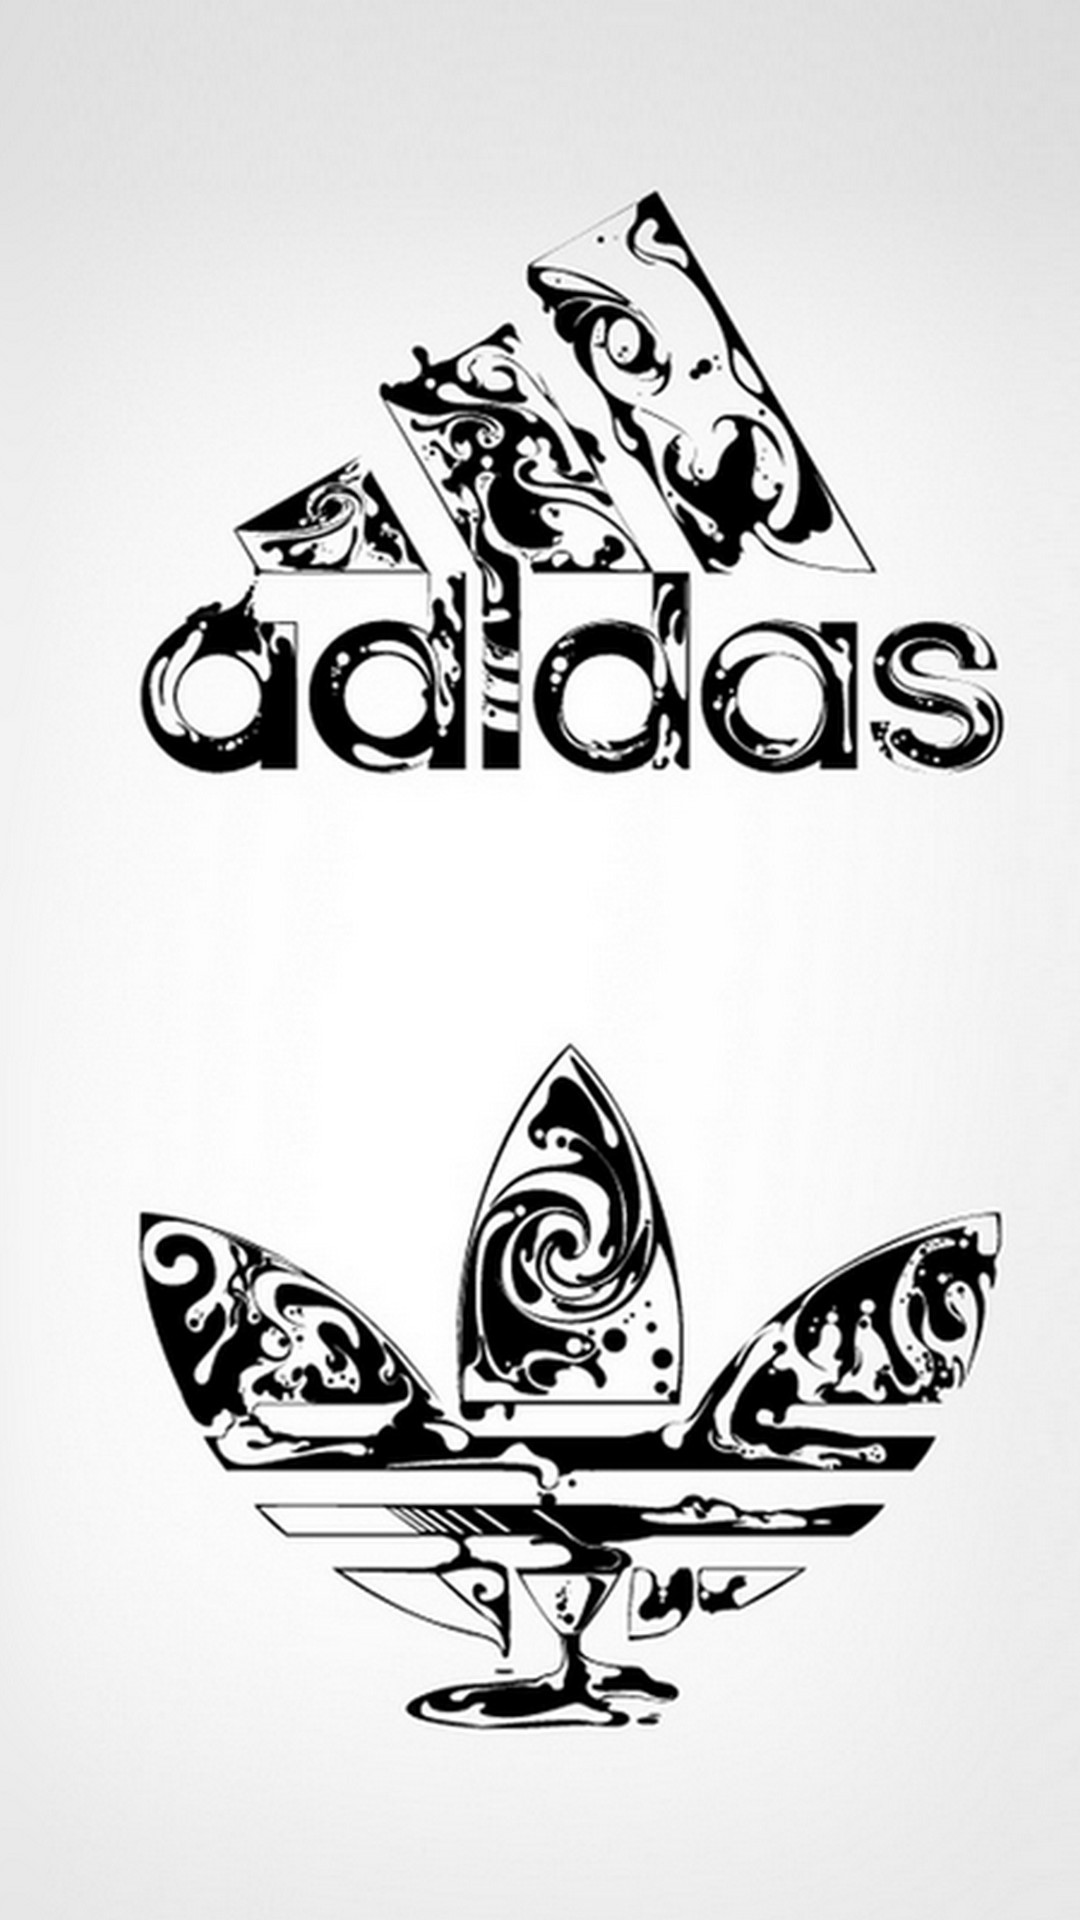 Adidas Logo iPhone 7 Wallpaper HD with high-resolution 1080x1920 pixel. Download all Mobile Wallpapers and Use them as wallpapers for your iPhone, Tablet, iPad, Android and other mobile devices